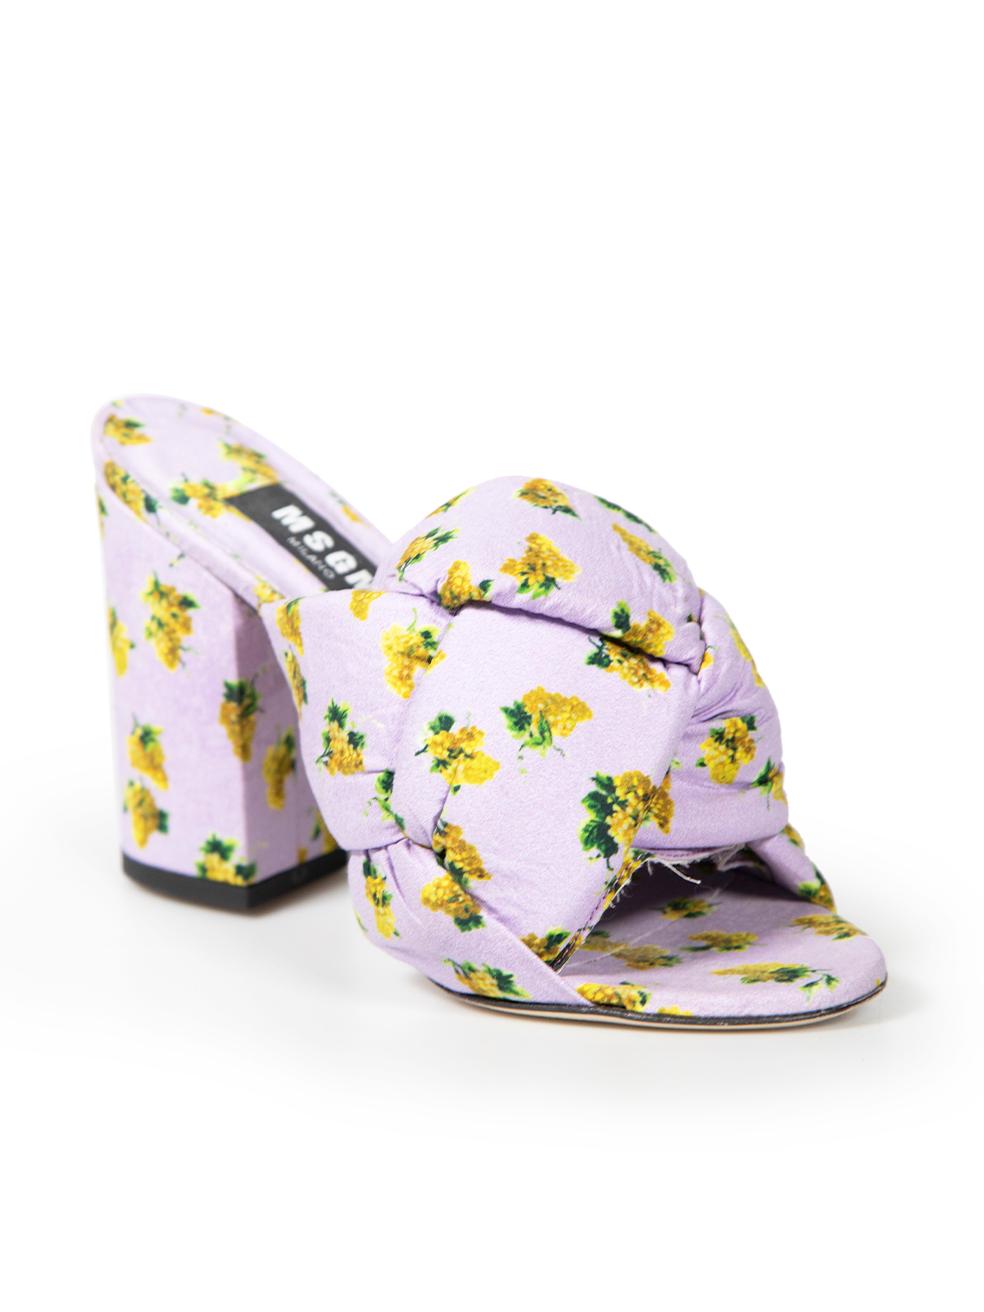 CONDITION is Very good. Hardly any visible wear to shoes is evident on this used MSGM designer resale item.
 
 
 
 Details
 
 
 Purple
 
 Cloth textile
 
 Slip on sandals
 
 Floral pattern
 
 Padded and weaved detail
 
 Open toe
 
 High block heel
